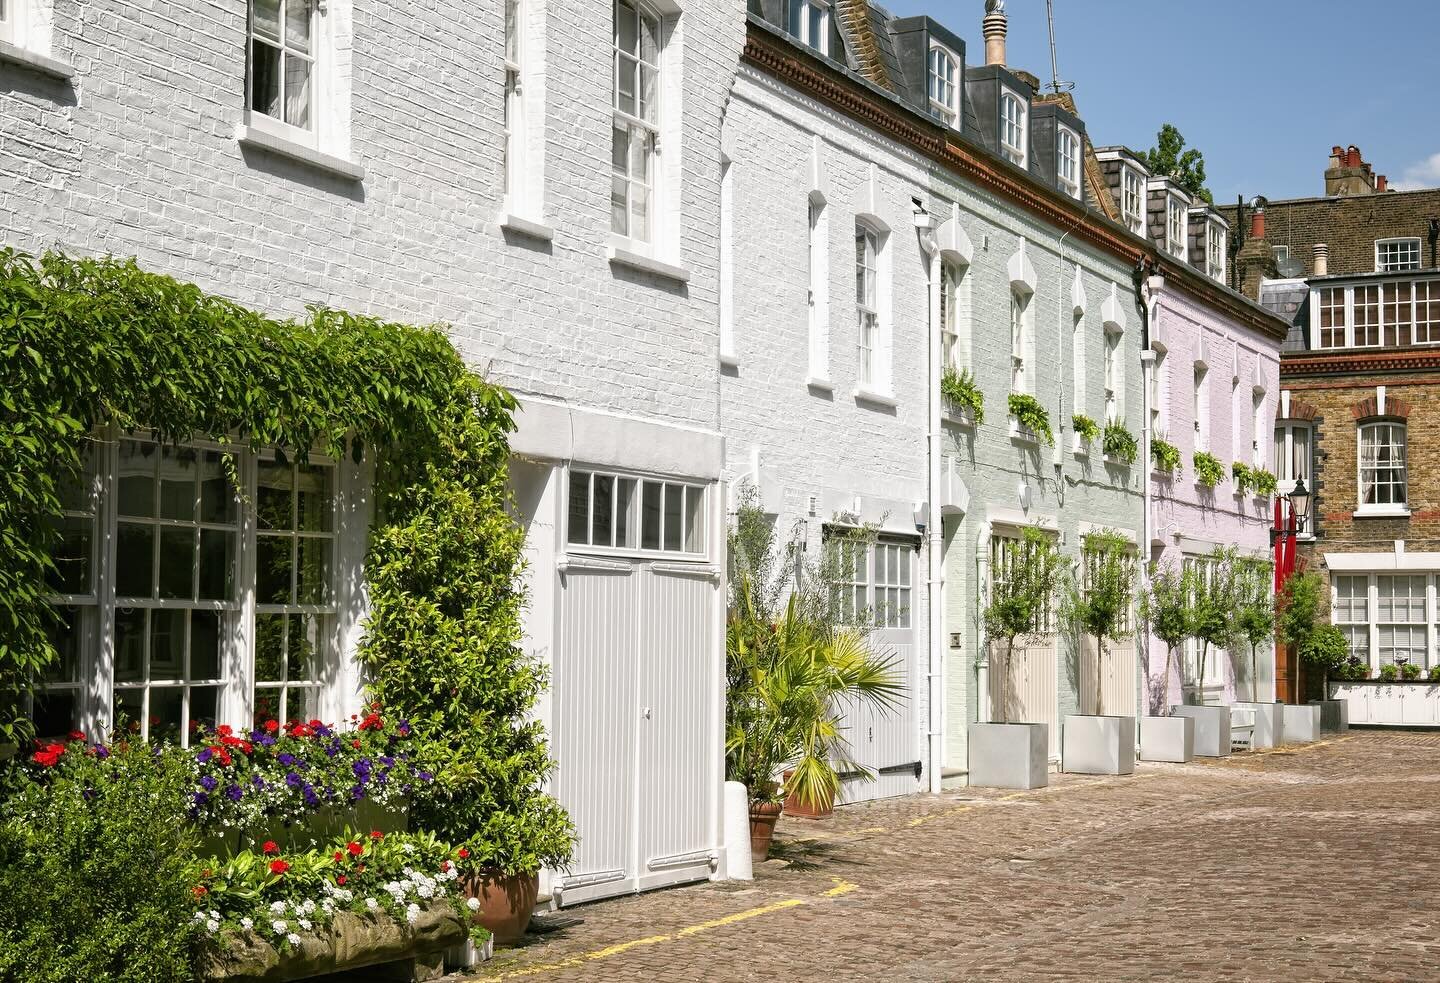 According to Rightmove, Thursday 28 March saw more property listings come to market on their site than any other day this year - a sign that the spring market is truly underway when it comes to fresh availability. 

Whilst many people opt to go down 